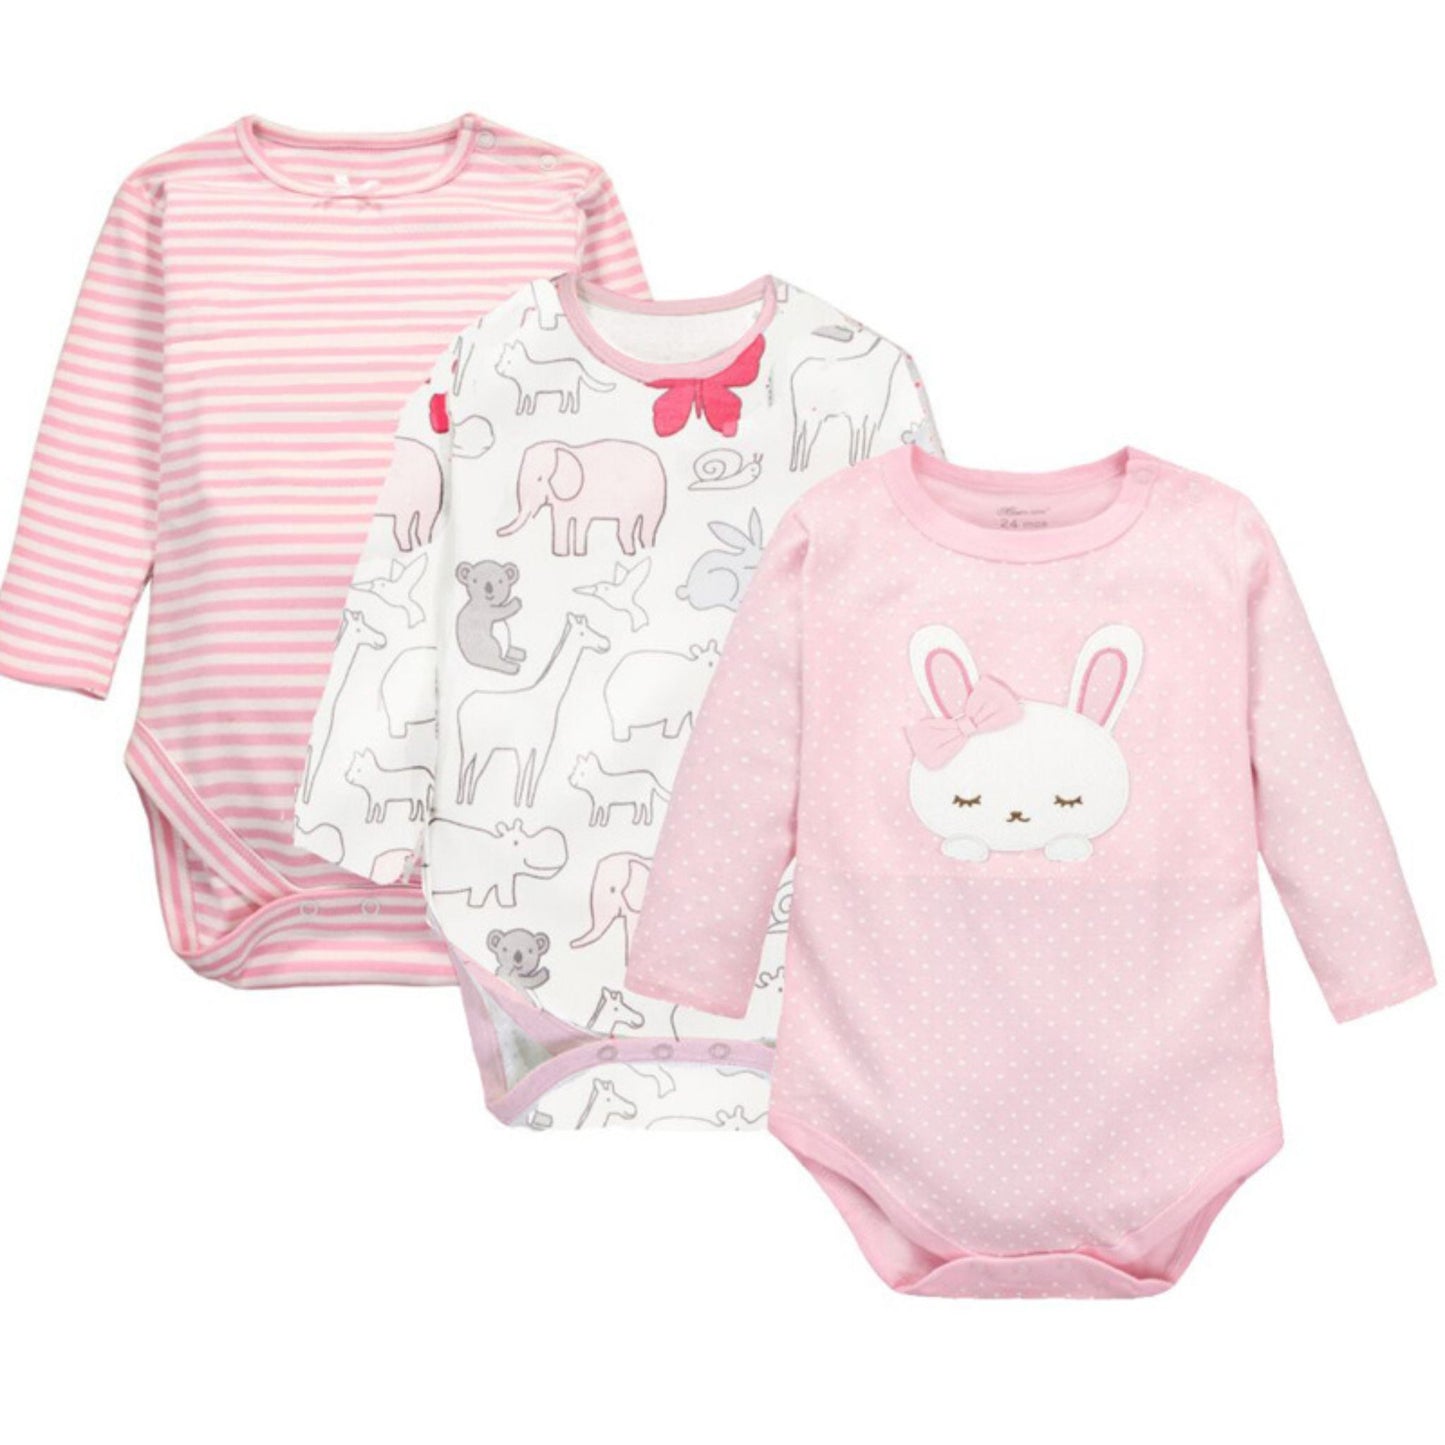 Bunny Bliss Girl Baby Gift Set 3-6 Months